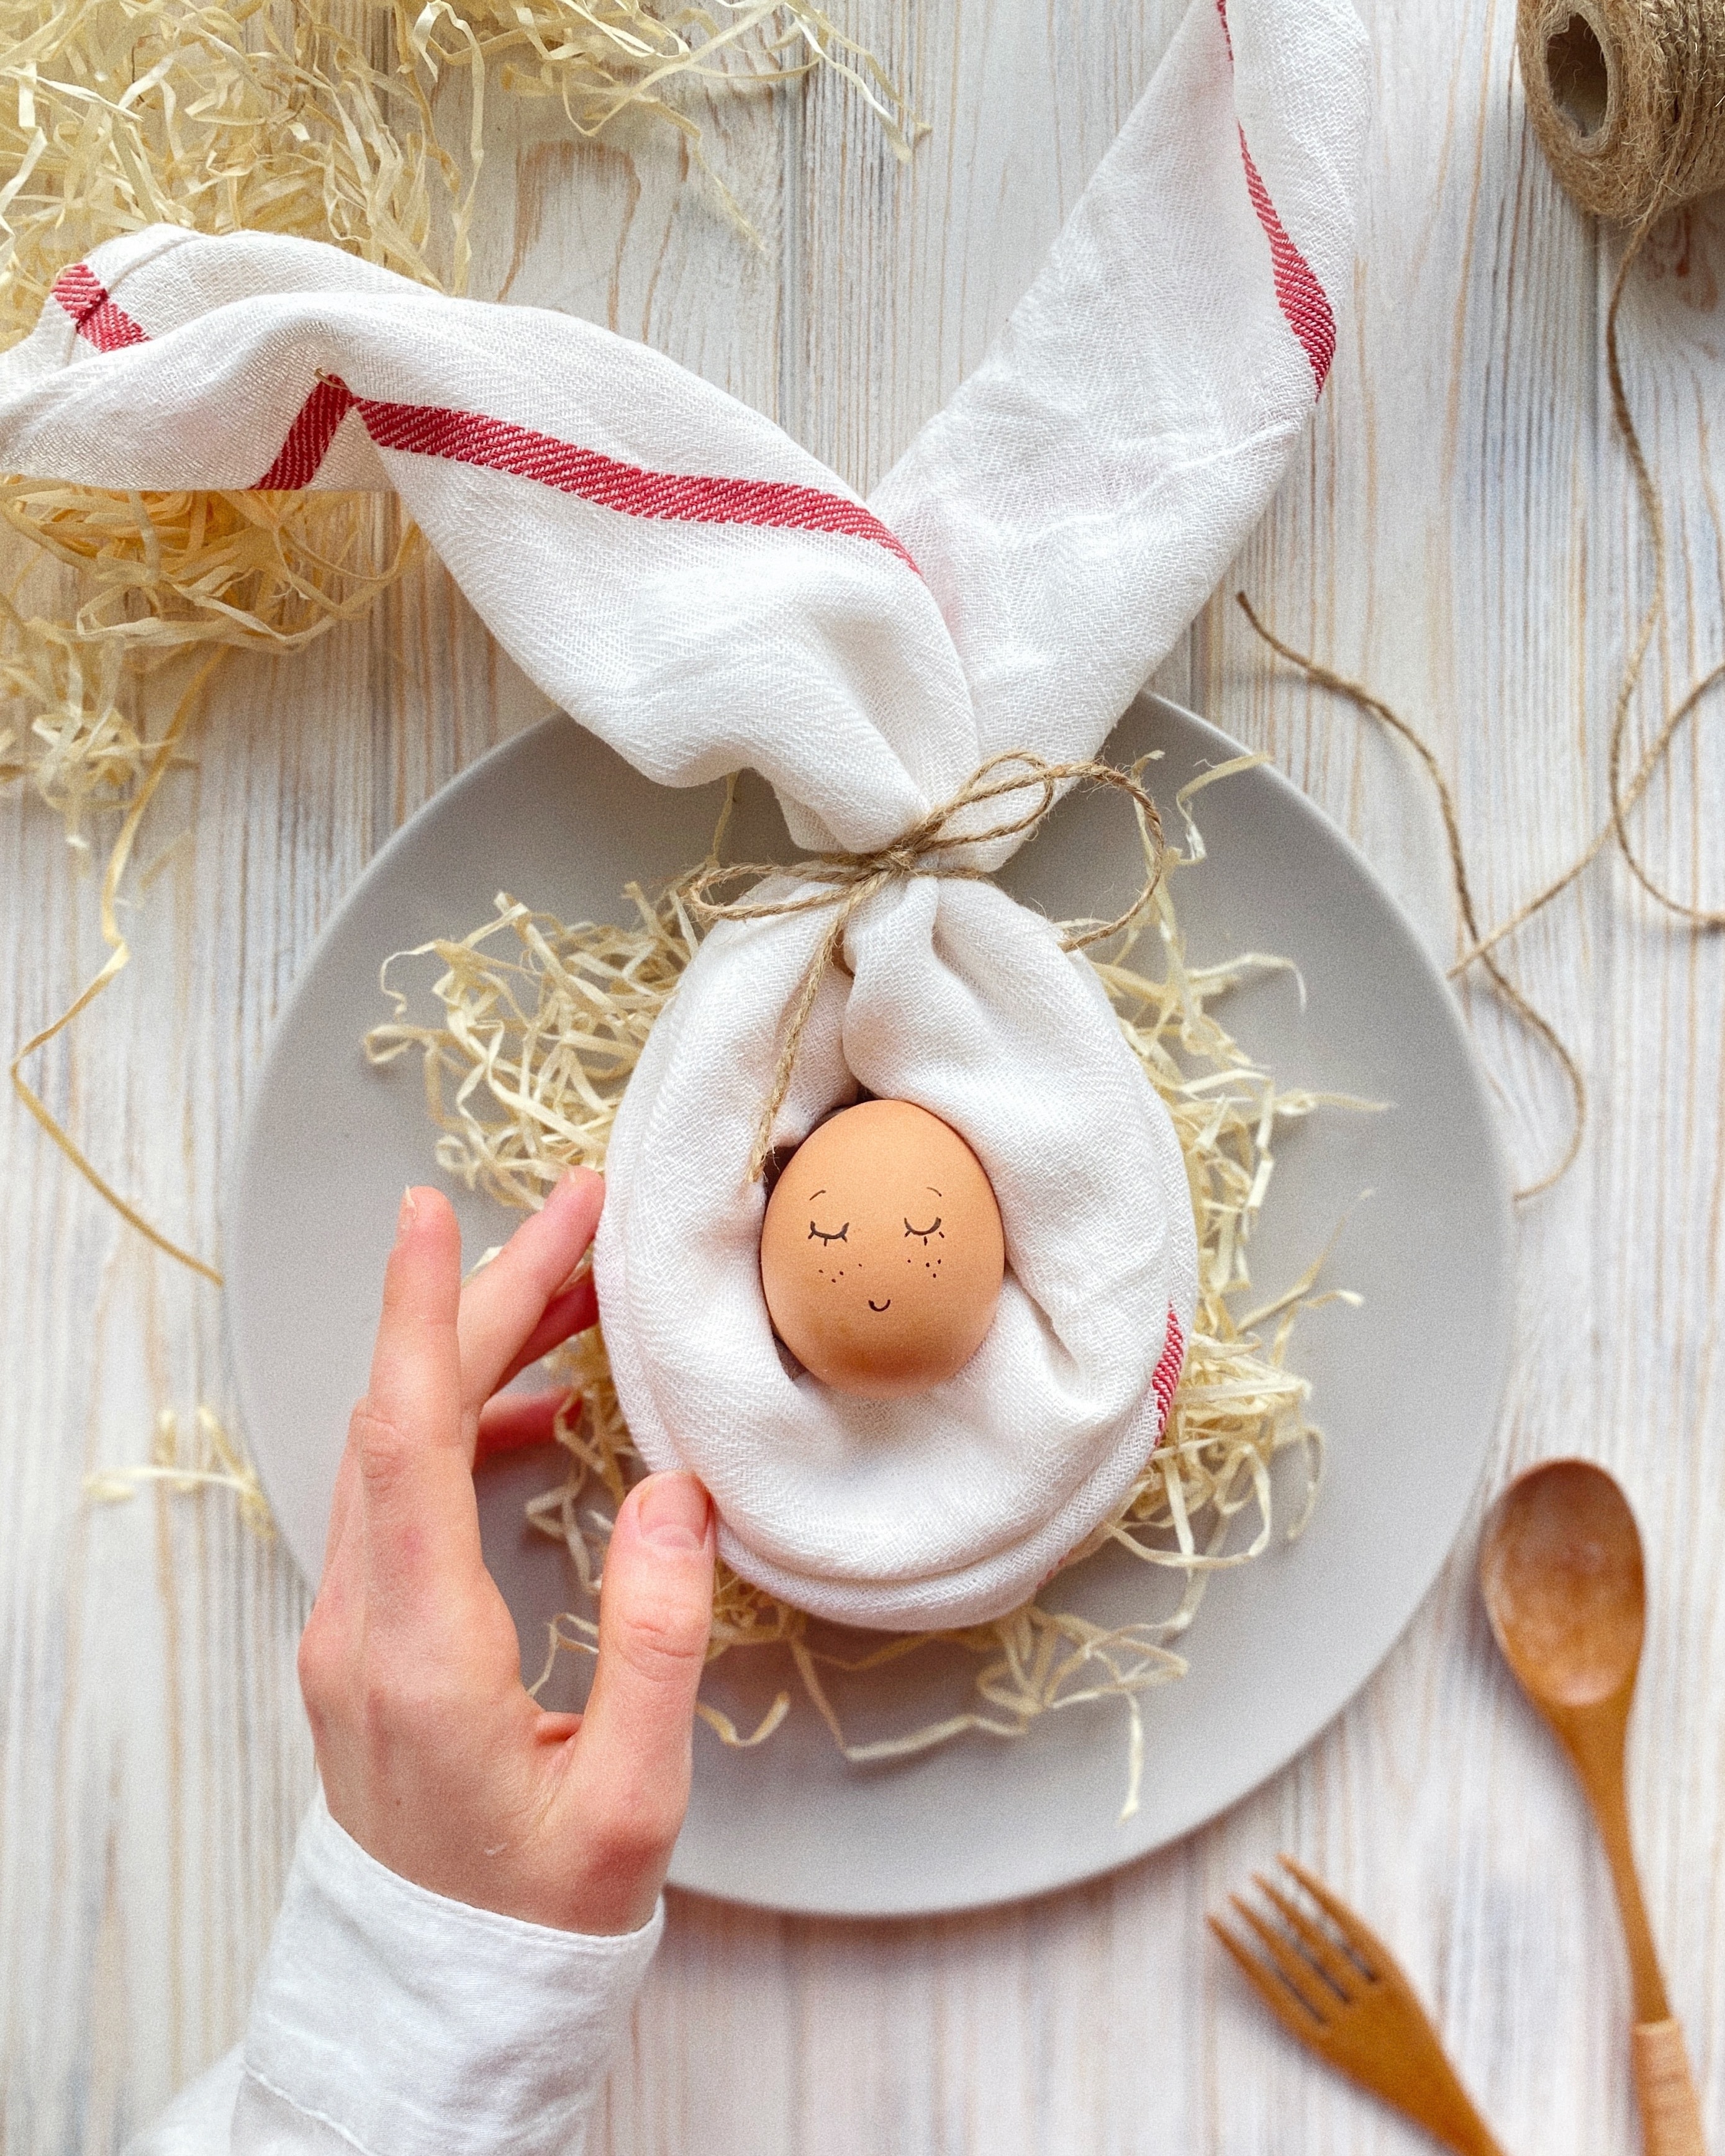 egg, food, hand, plate, emoticon, smiley, spoons Full HD